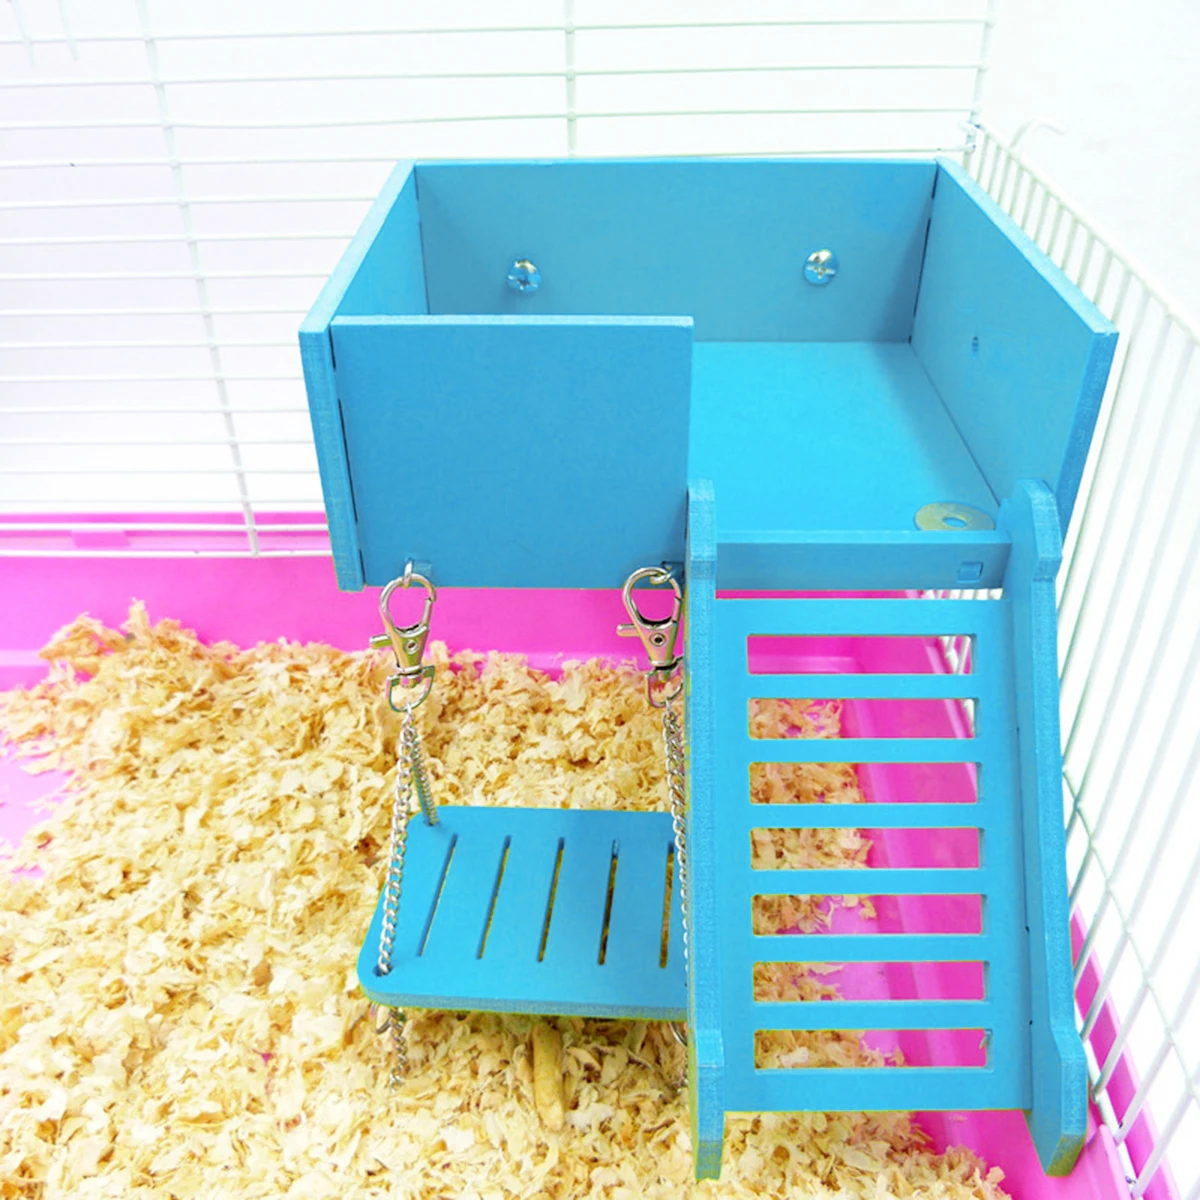 

1 Set Hamster Crawling Ladder Funny Swing Platform Toys Set Small Pets Hamster Fancy Rat Interactive Toys Supplies White Blue